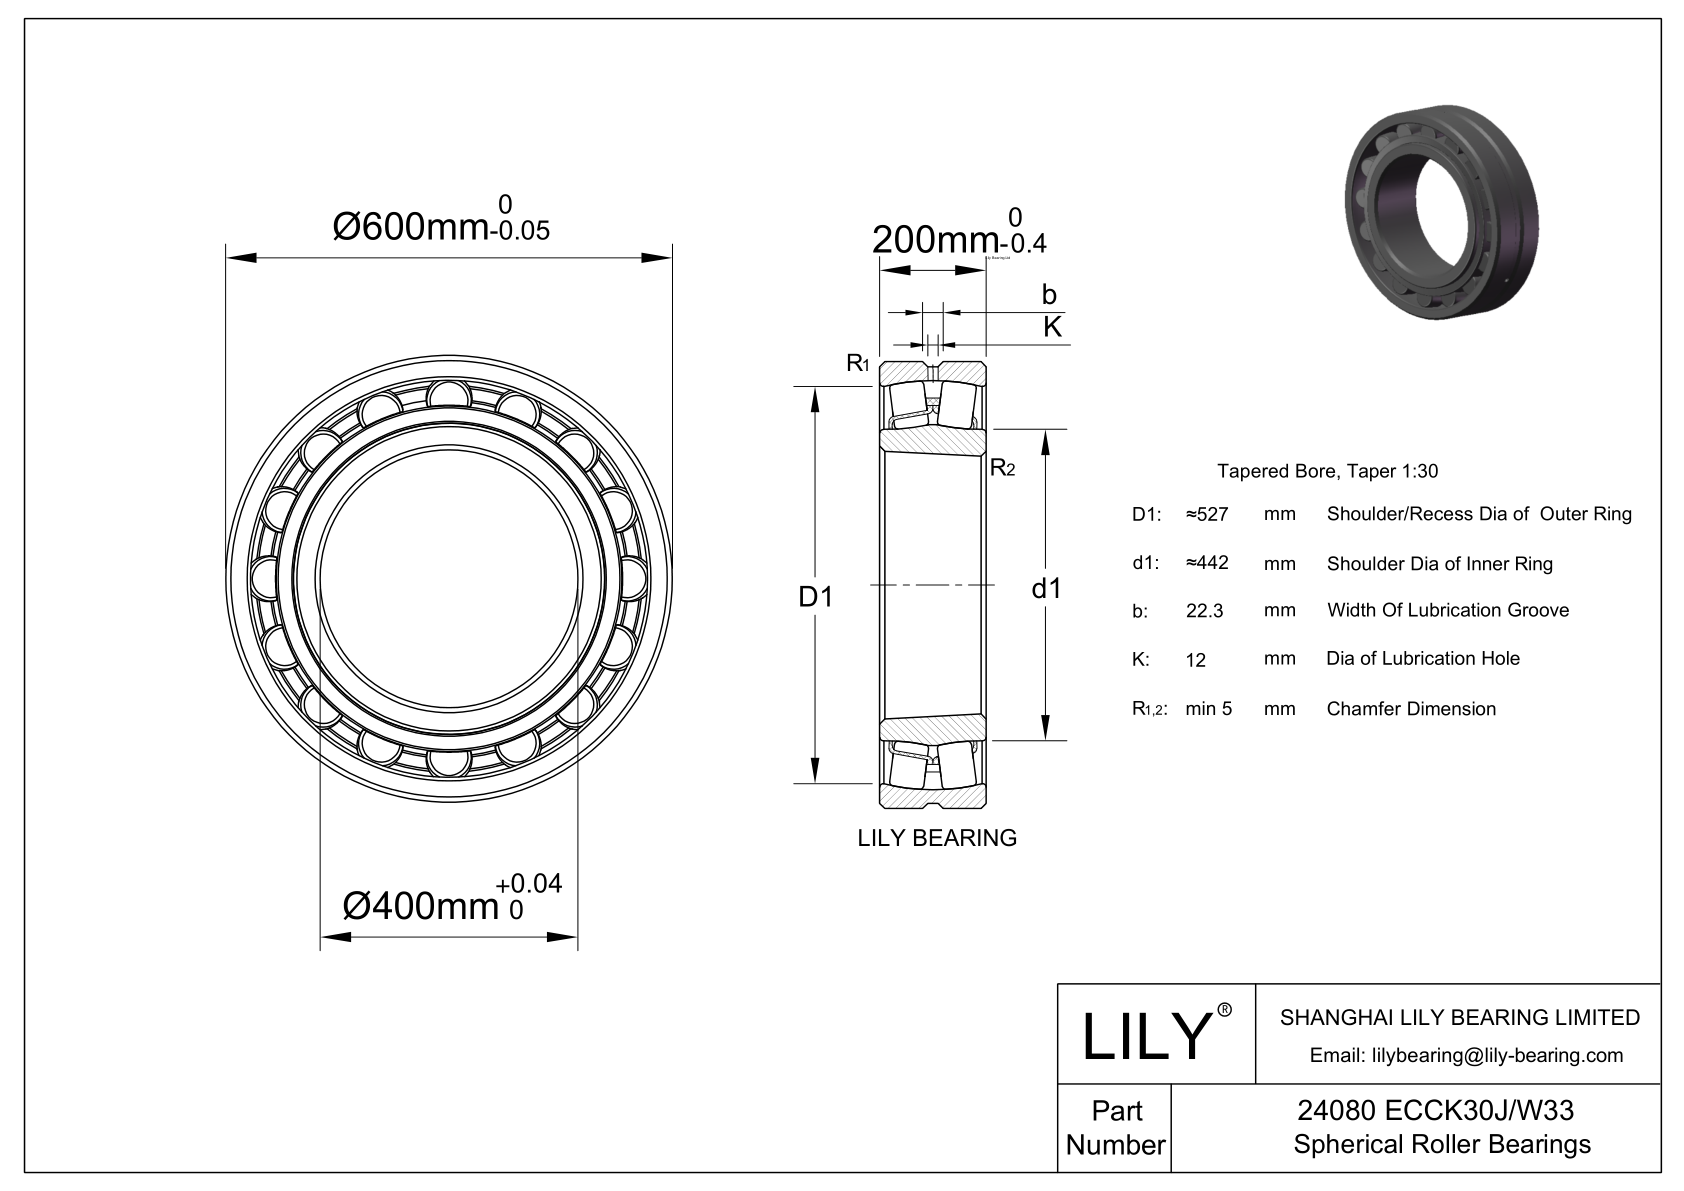 24080 ECCK30J/W33 Double Row Spherical Roller Bearing cad drawing